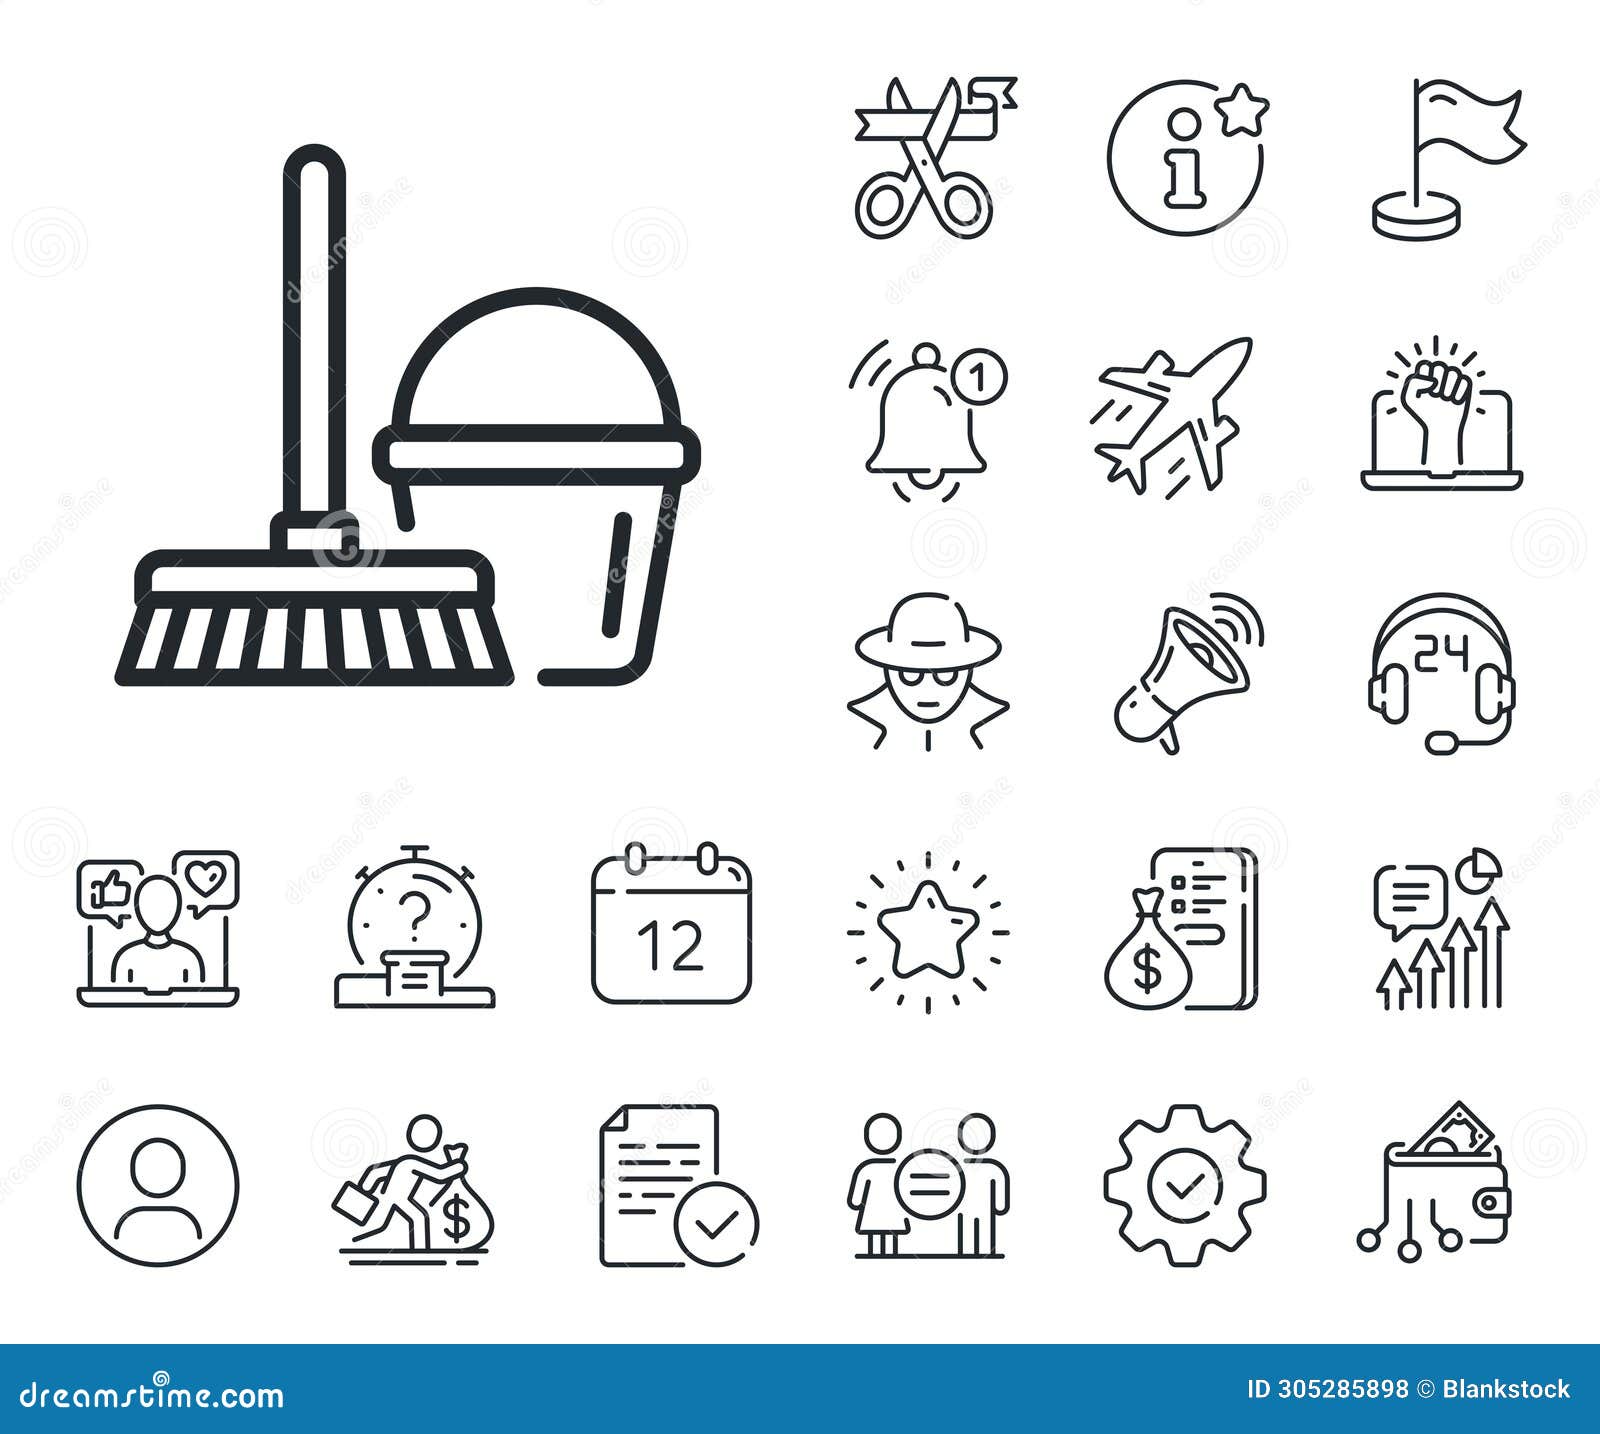 cleaning bucket with mop line icon. salaryman, gender equality and alert bell. 